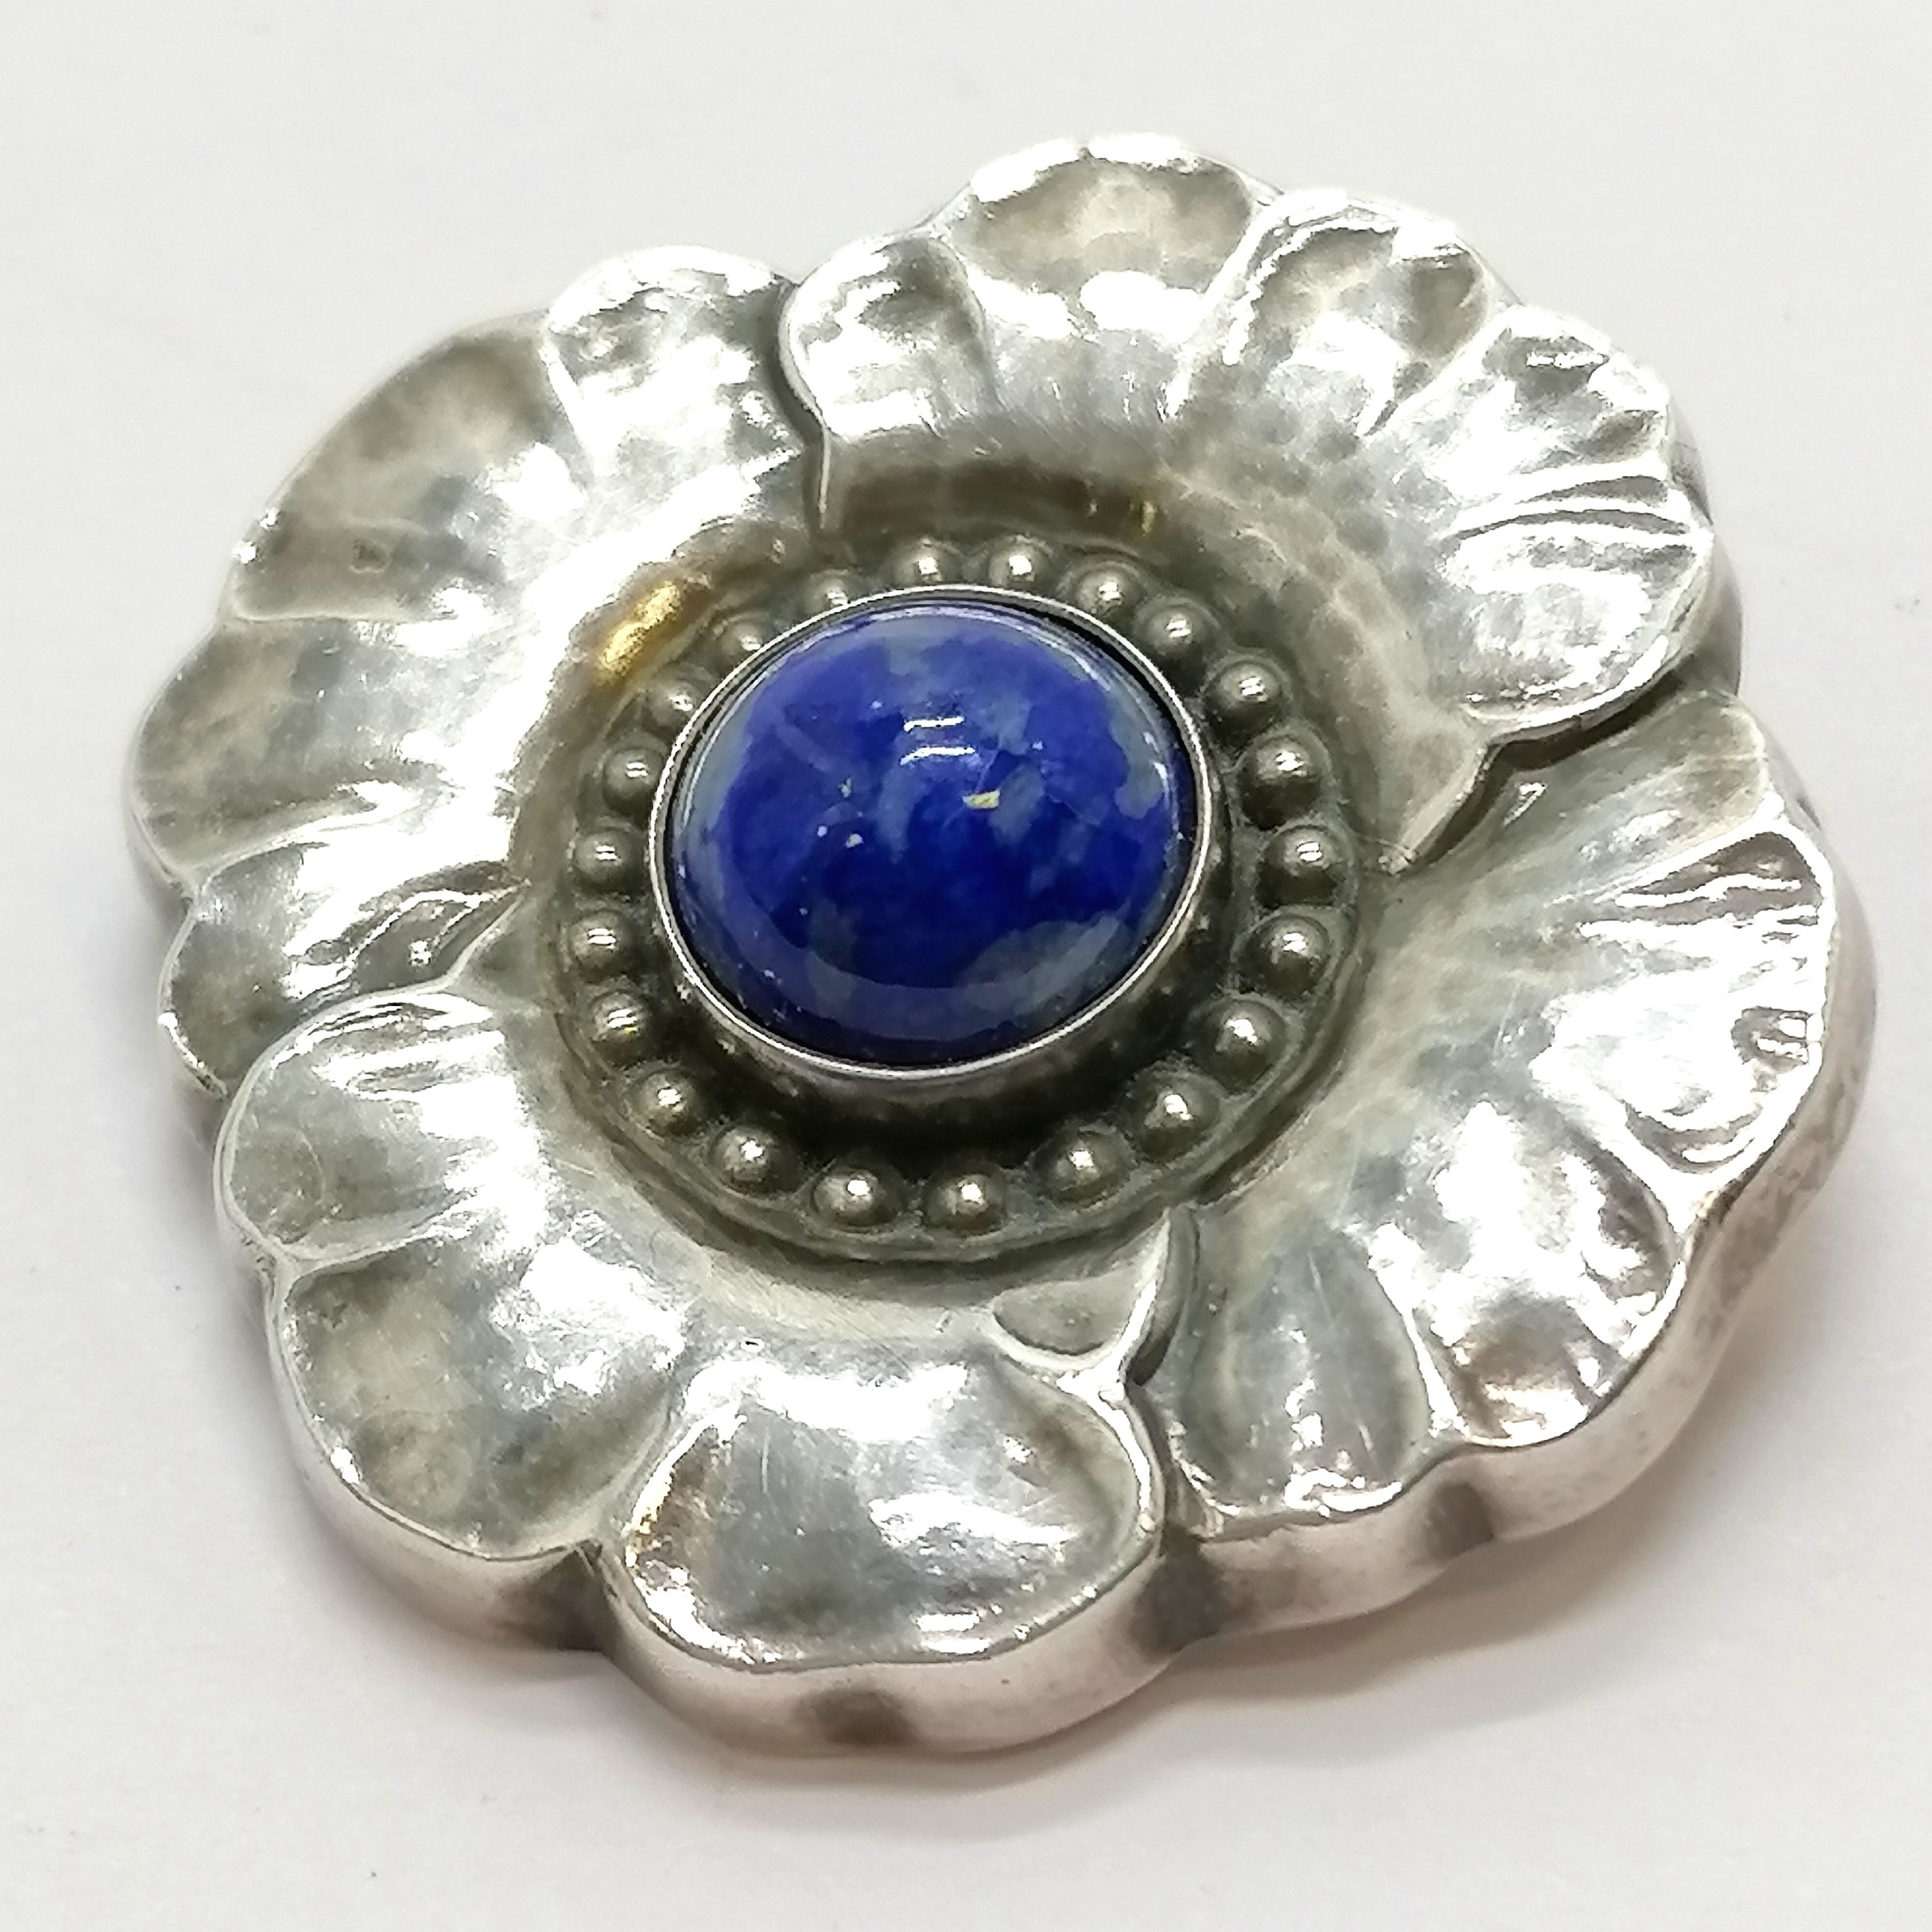 Georg Jensen silver flower brooch #189 set with cabochon lapis - 3cm across & 9g total weight